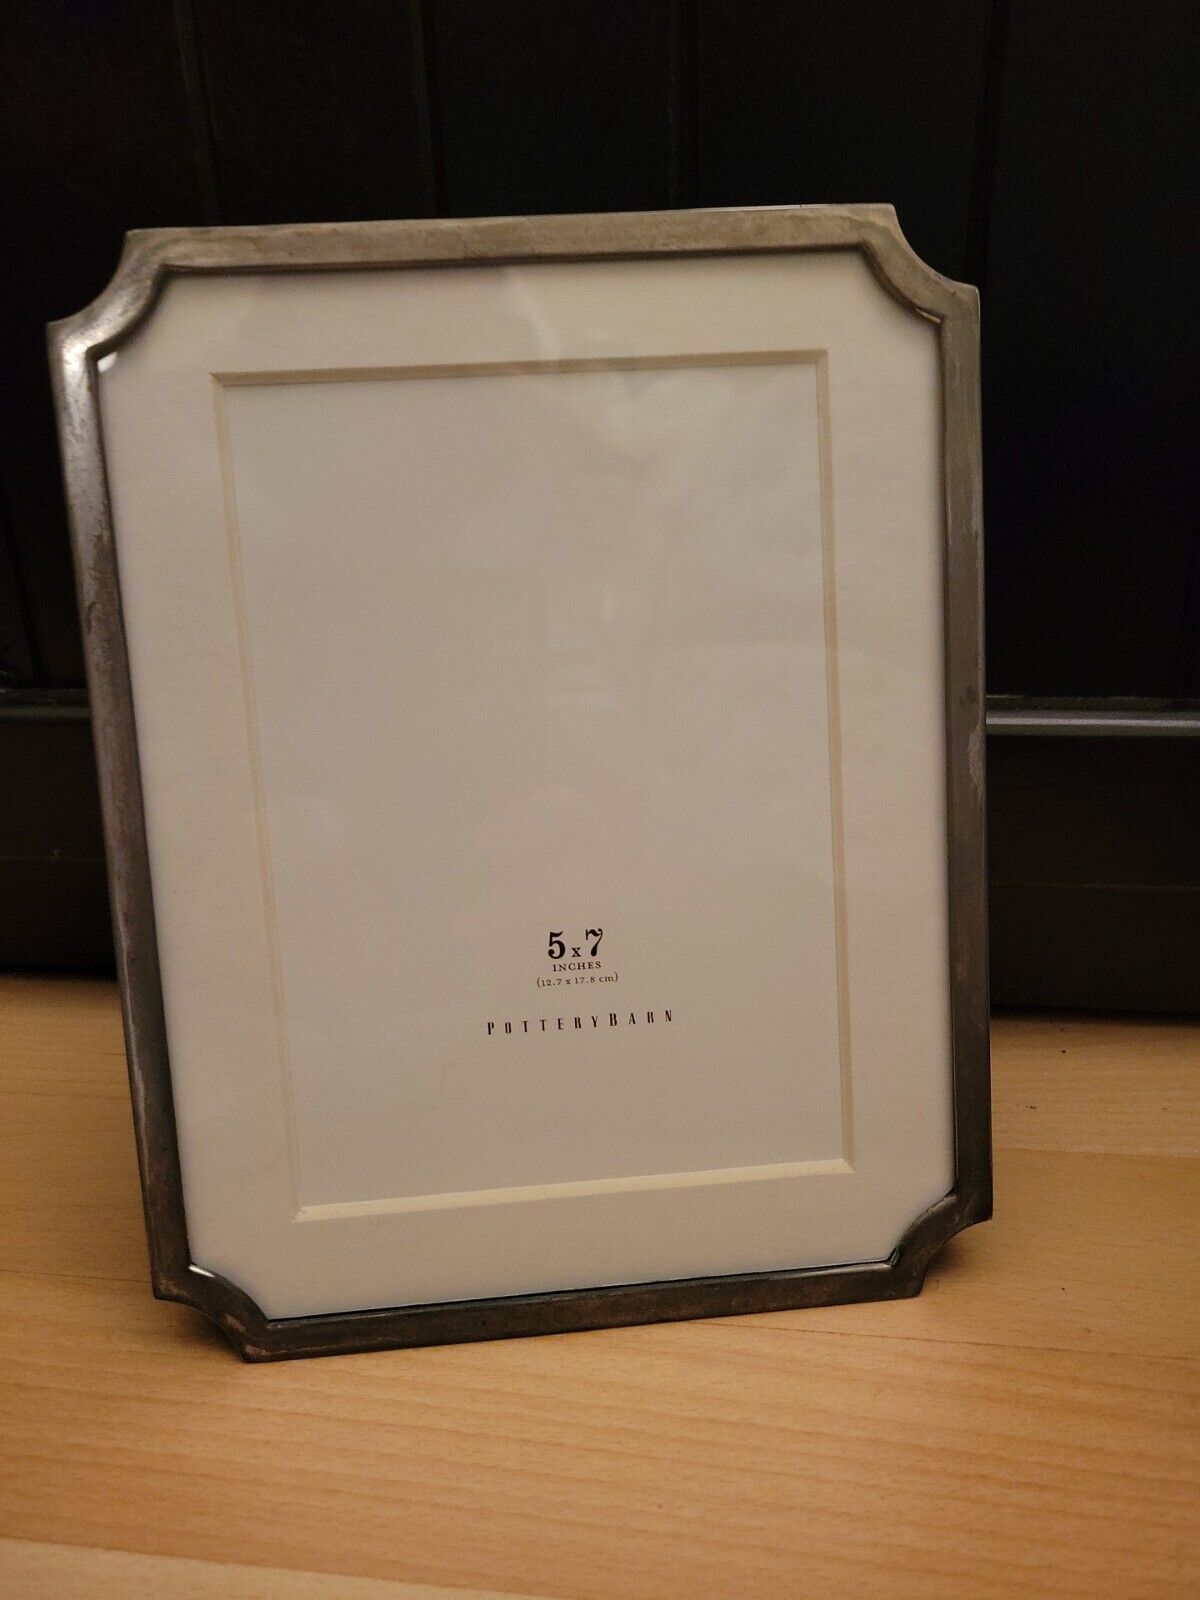 Pottery Barn Abigail Polished Silver Finish Frame 5 x 7 Rounded Corners 